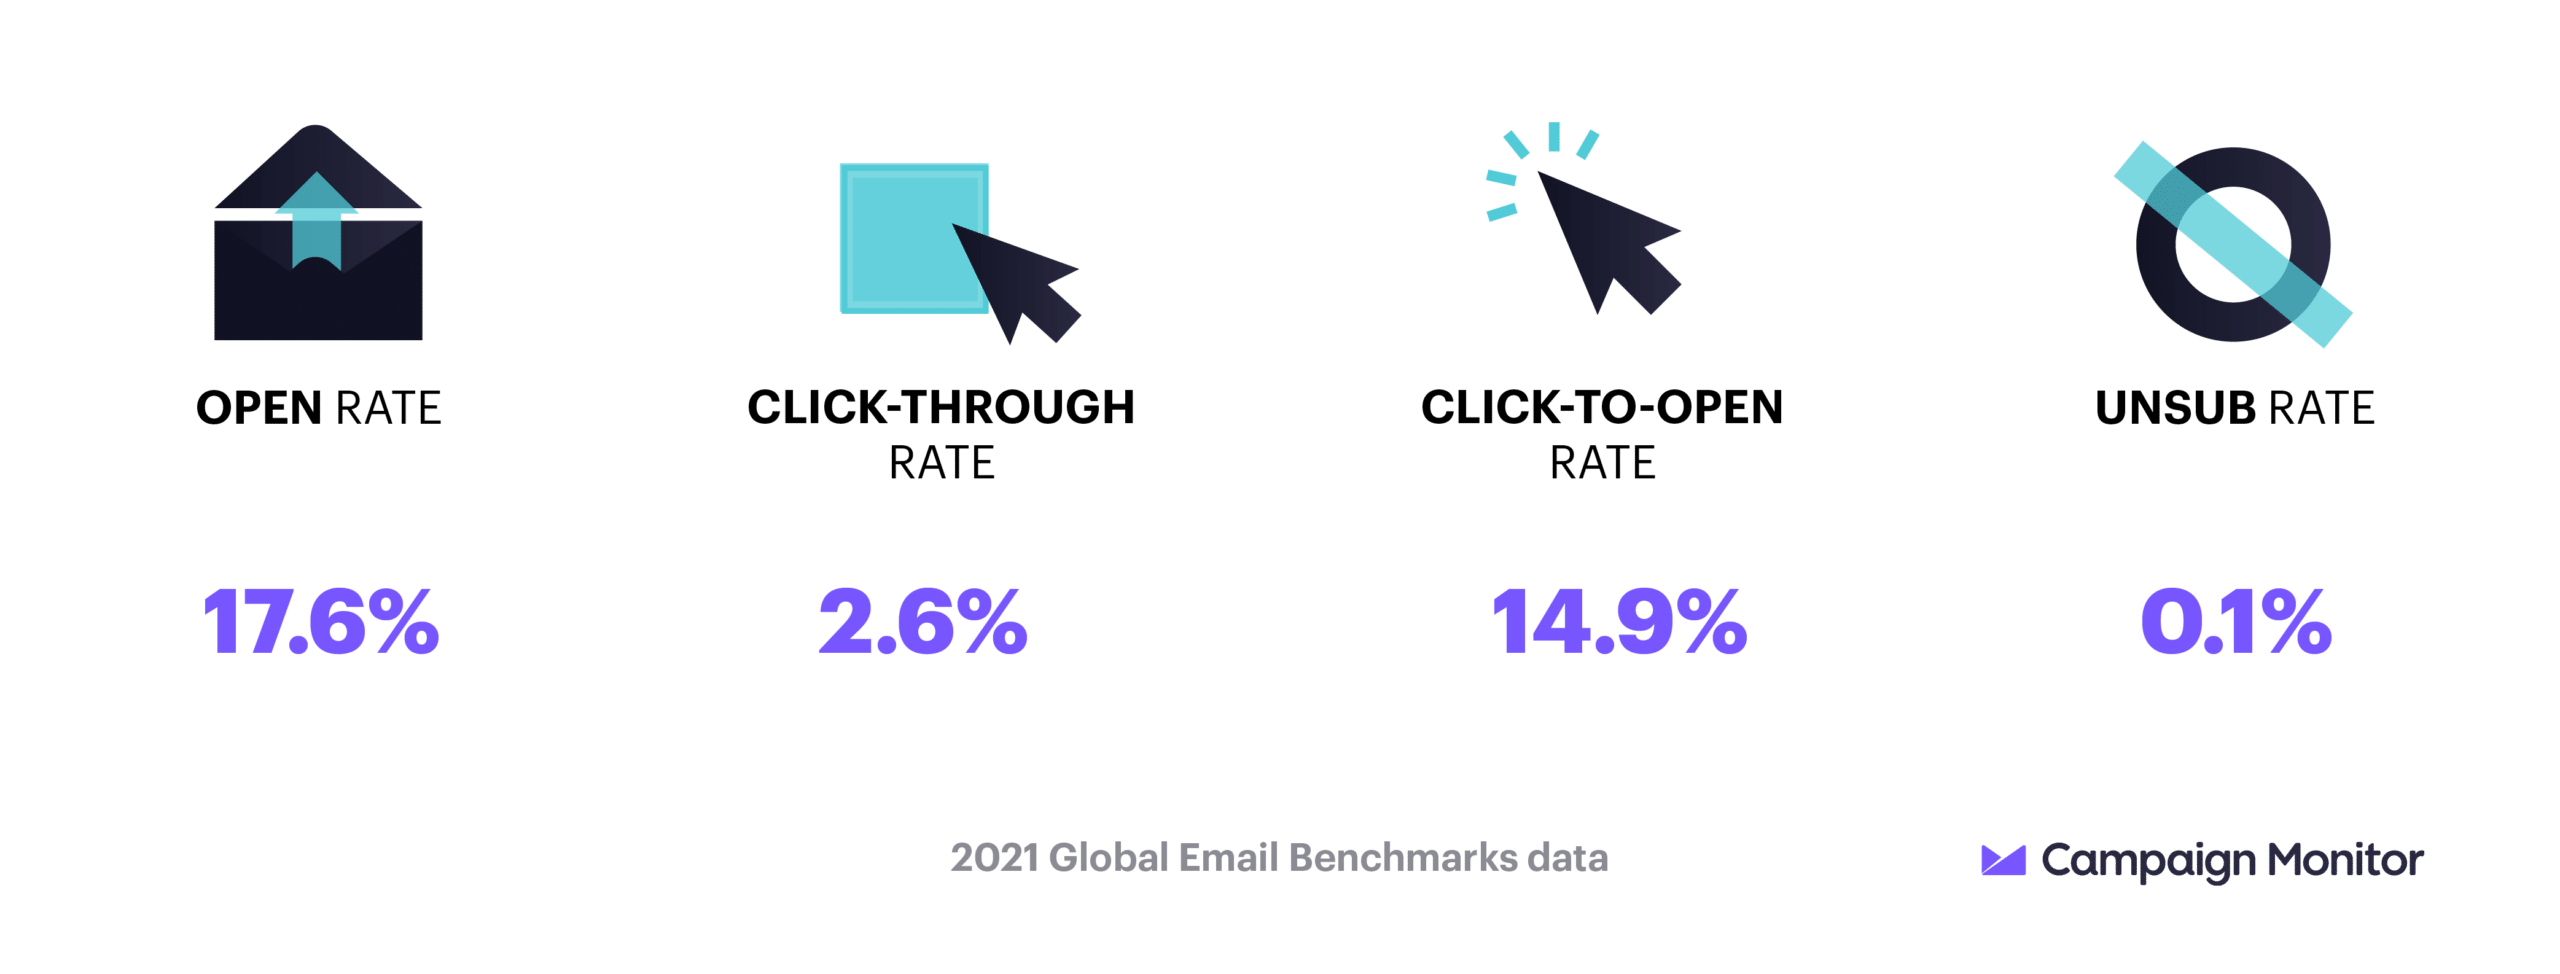 Email marketing benchmarks to inform your 2021 email strategy